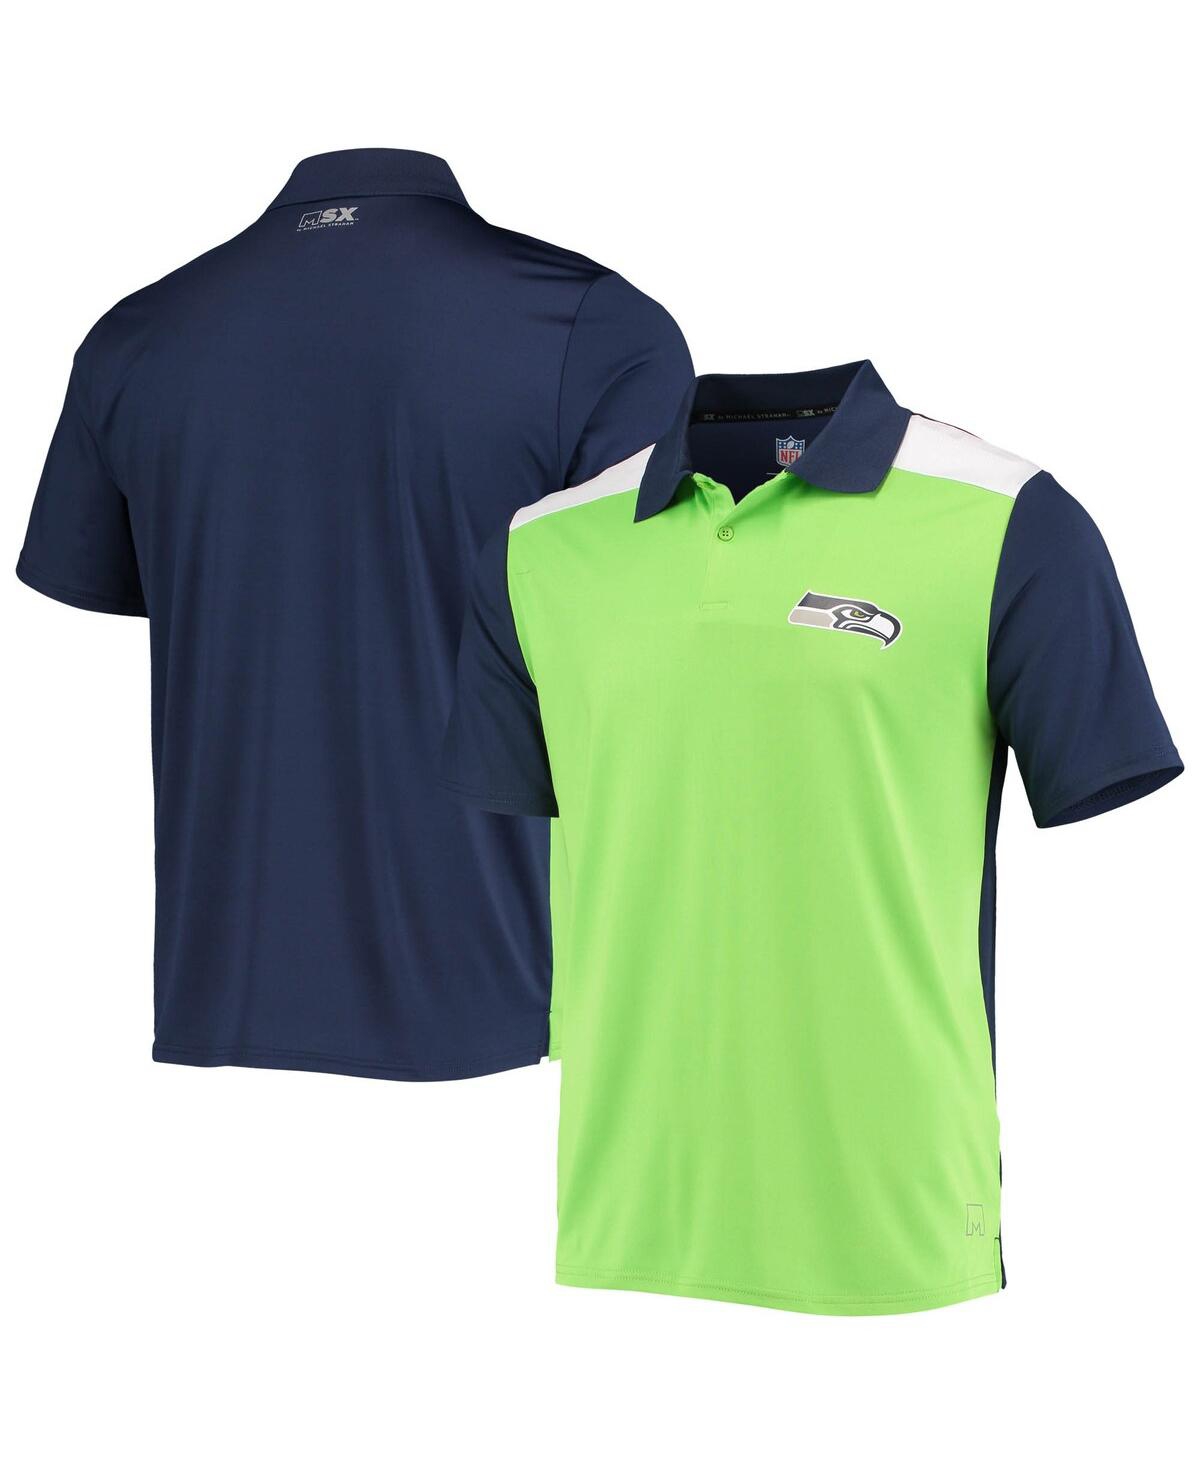 Msx By Michael Strahan Men's  Neon Green, College Navy Seattle Seahawks Challenge Color Block Perform In Neon Green,college Navy